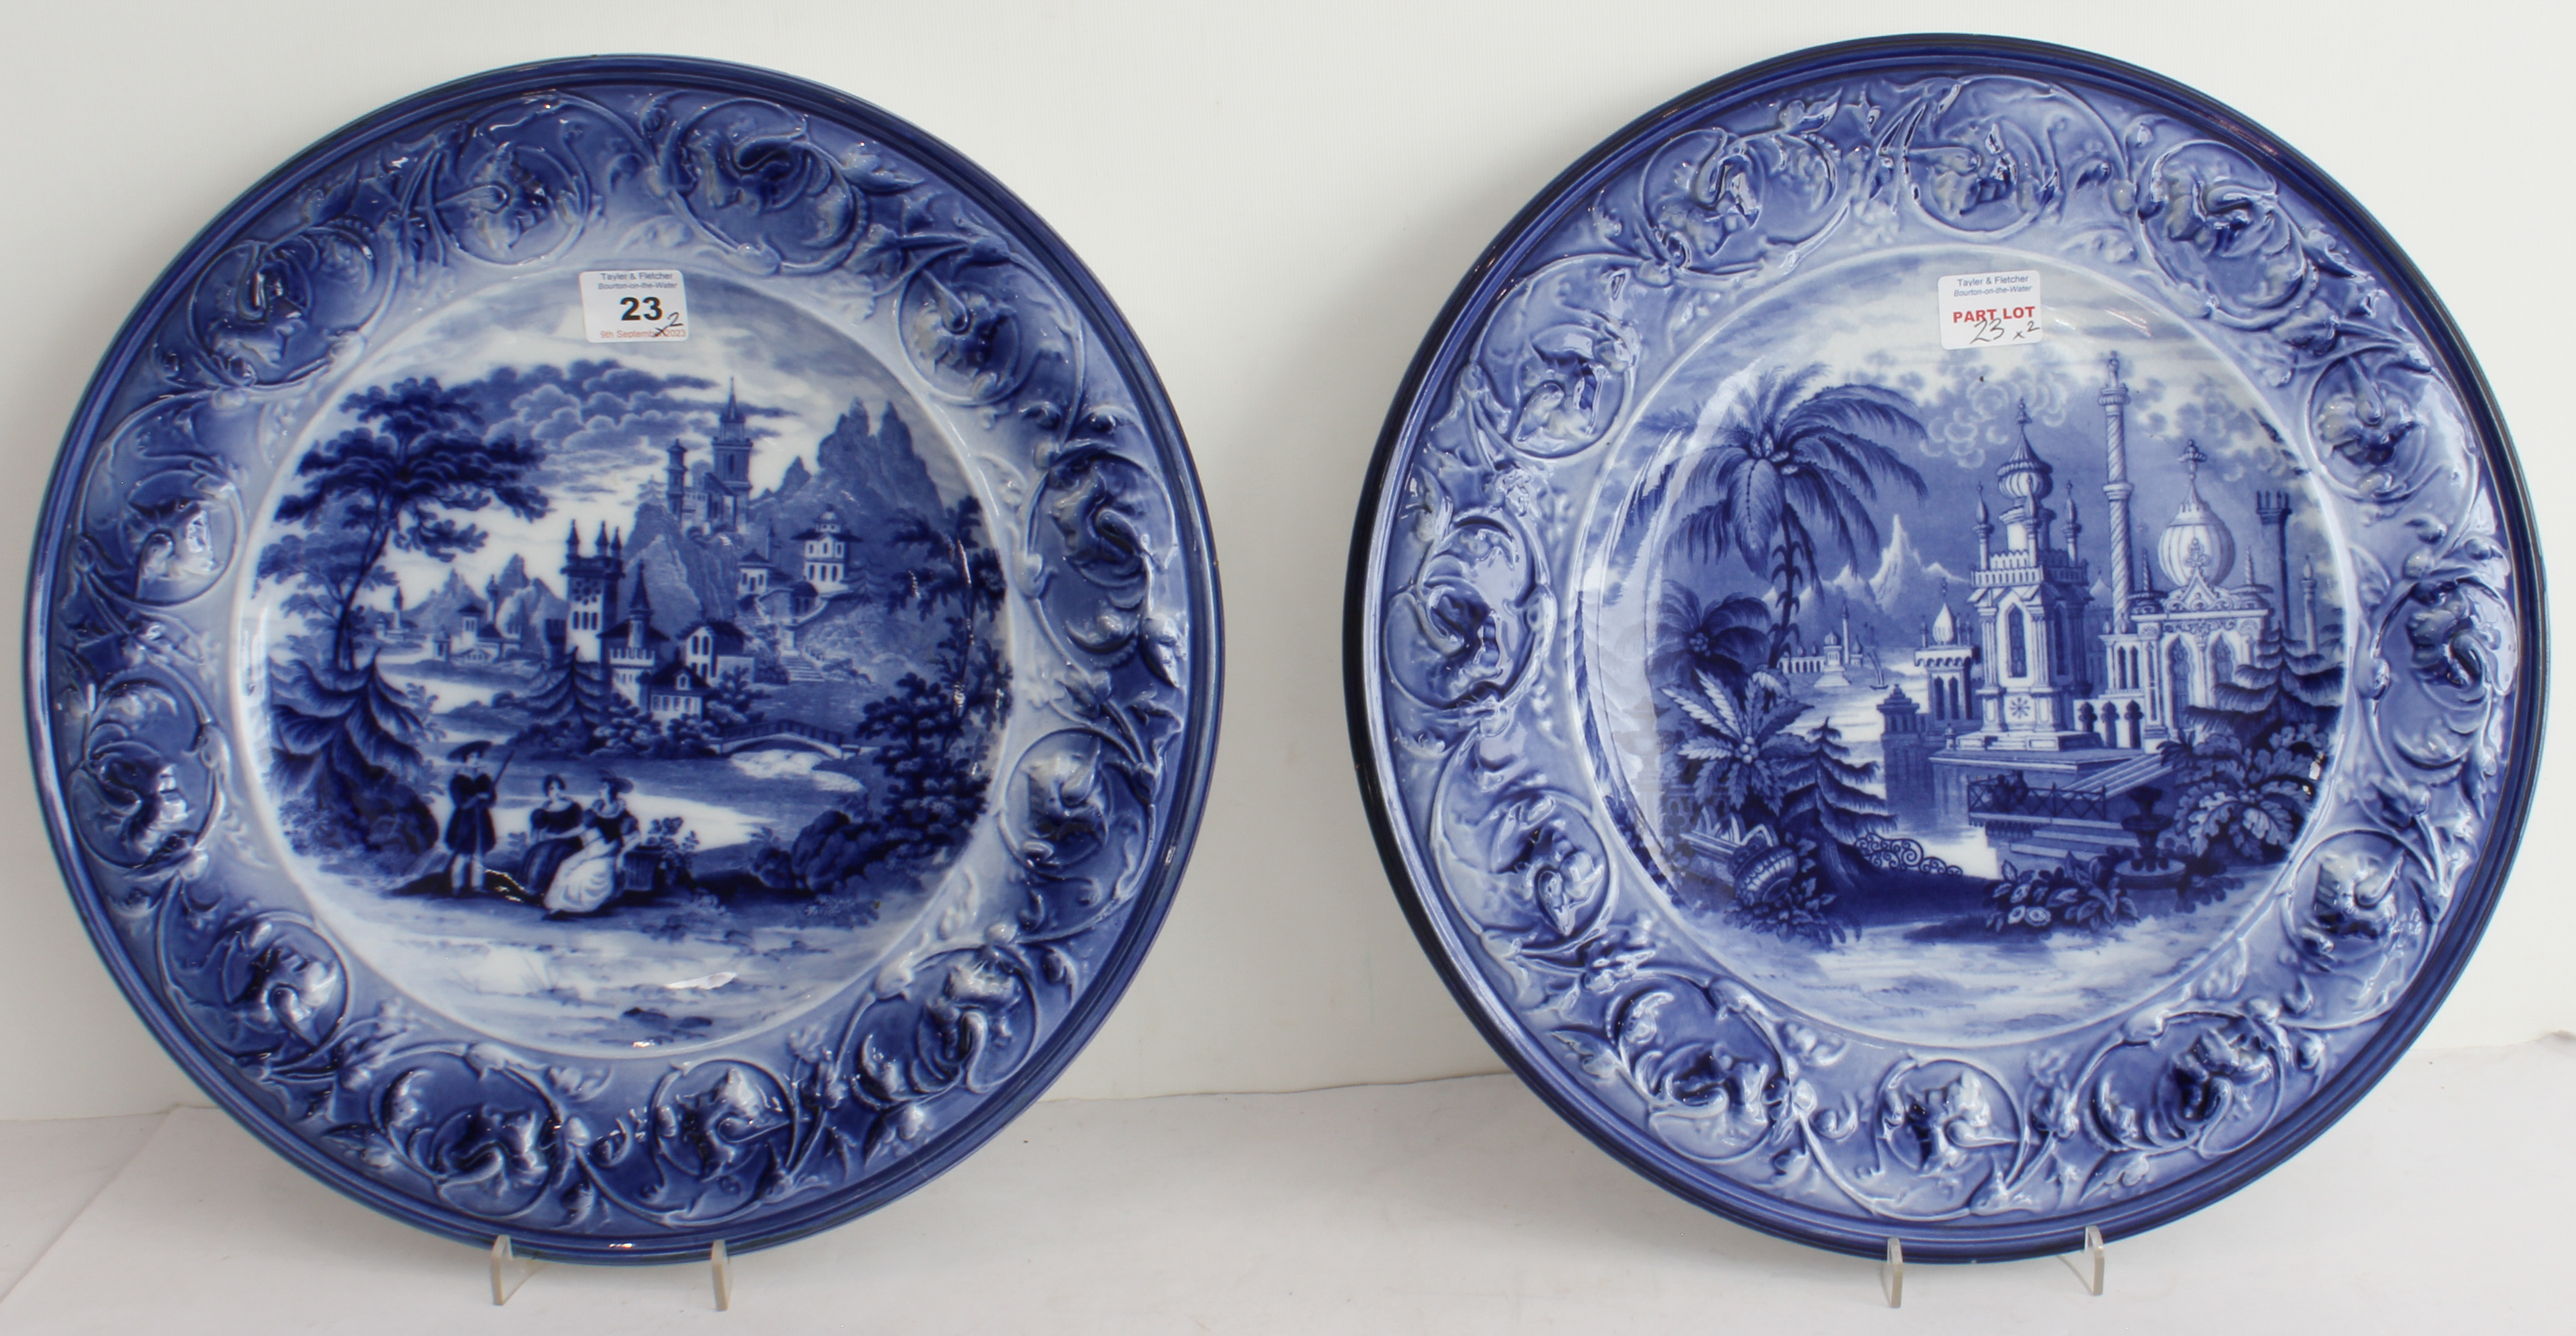 A pair of 19th century blue-and-white pottery chargers. One decorated in European style with